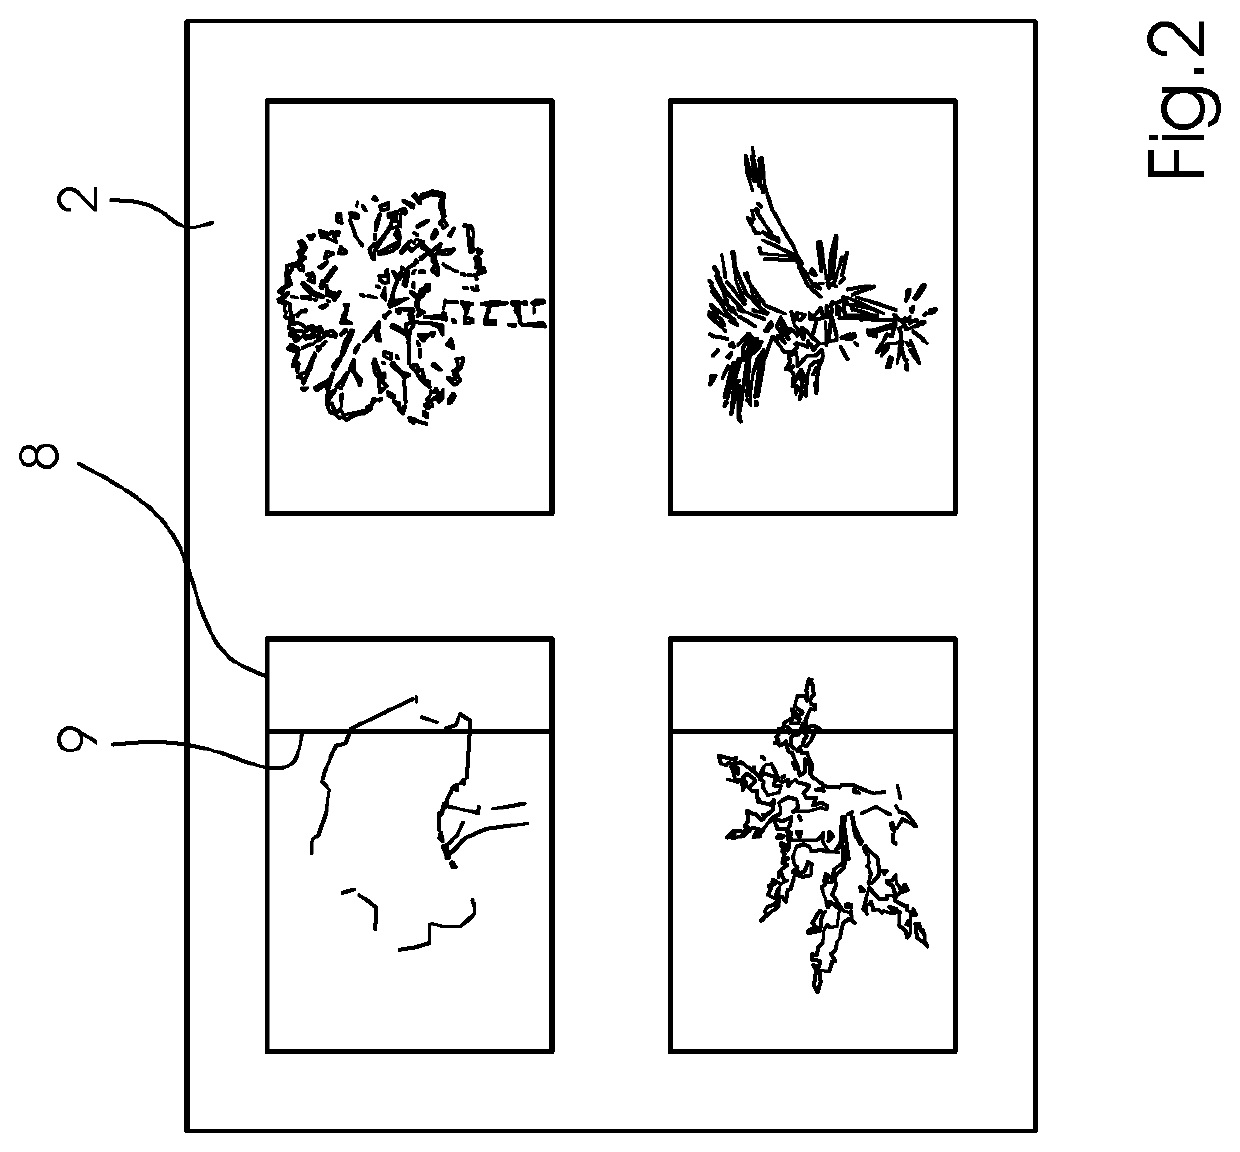 Method for detecting defective printing nozzles in an inkjet printing machine